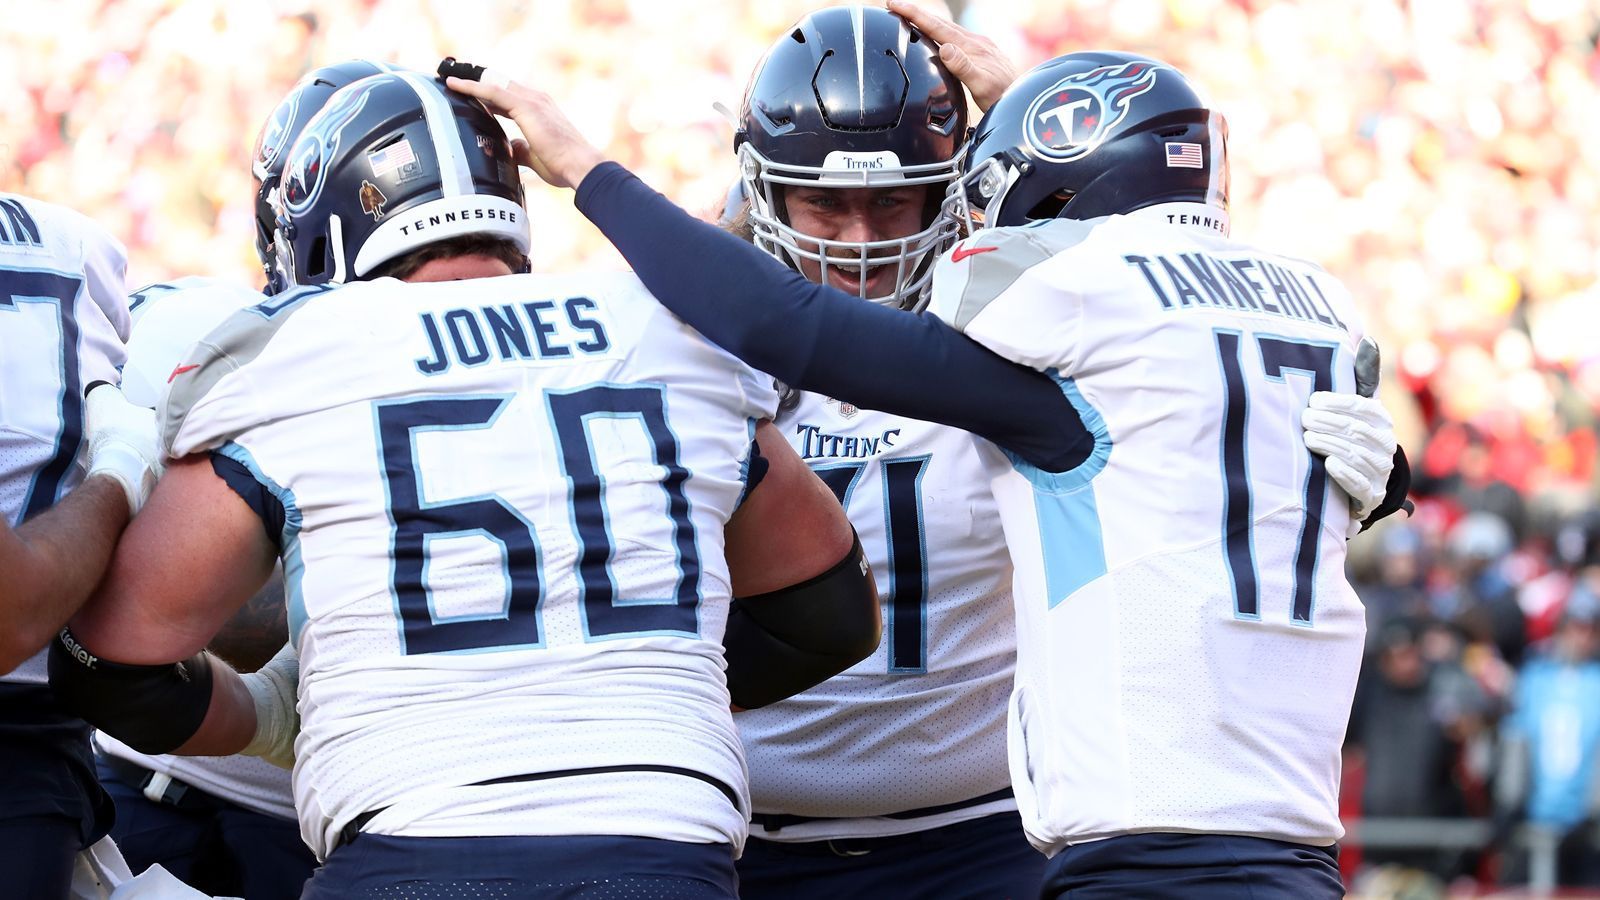 
                <strong>Platz 24: Tennessee Titans</strong><br>
                Pro-Bowl-Selections insgesamt: 36
              